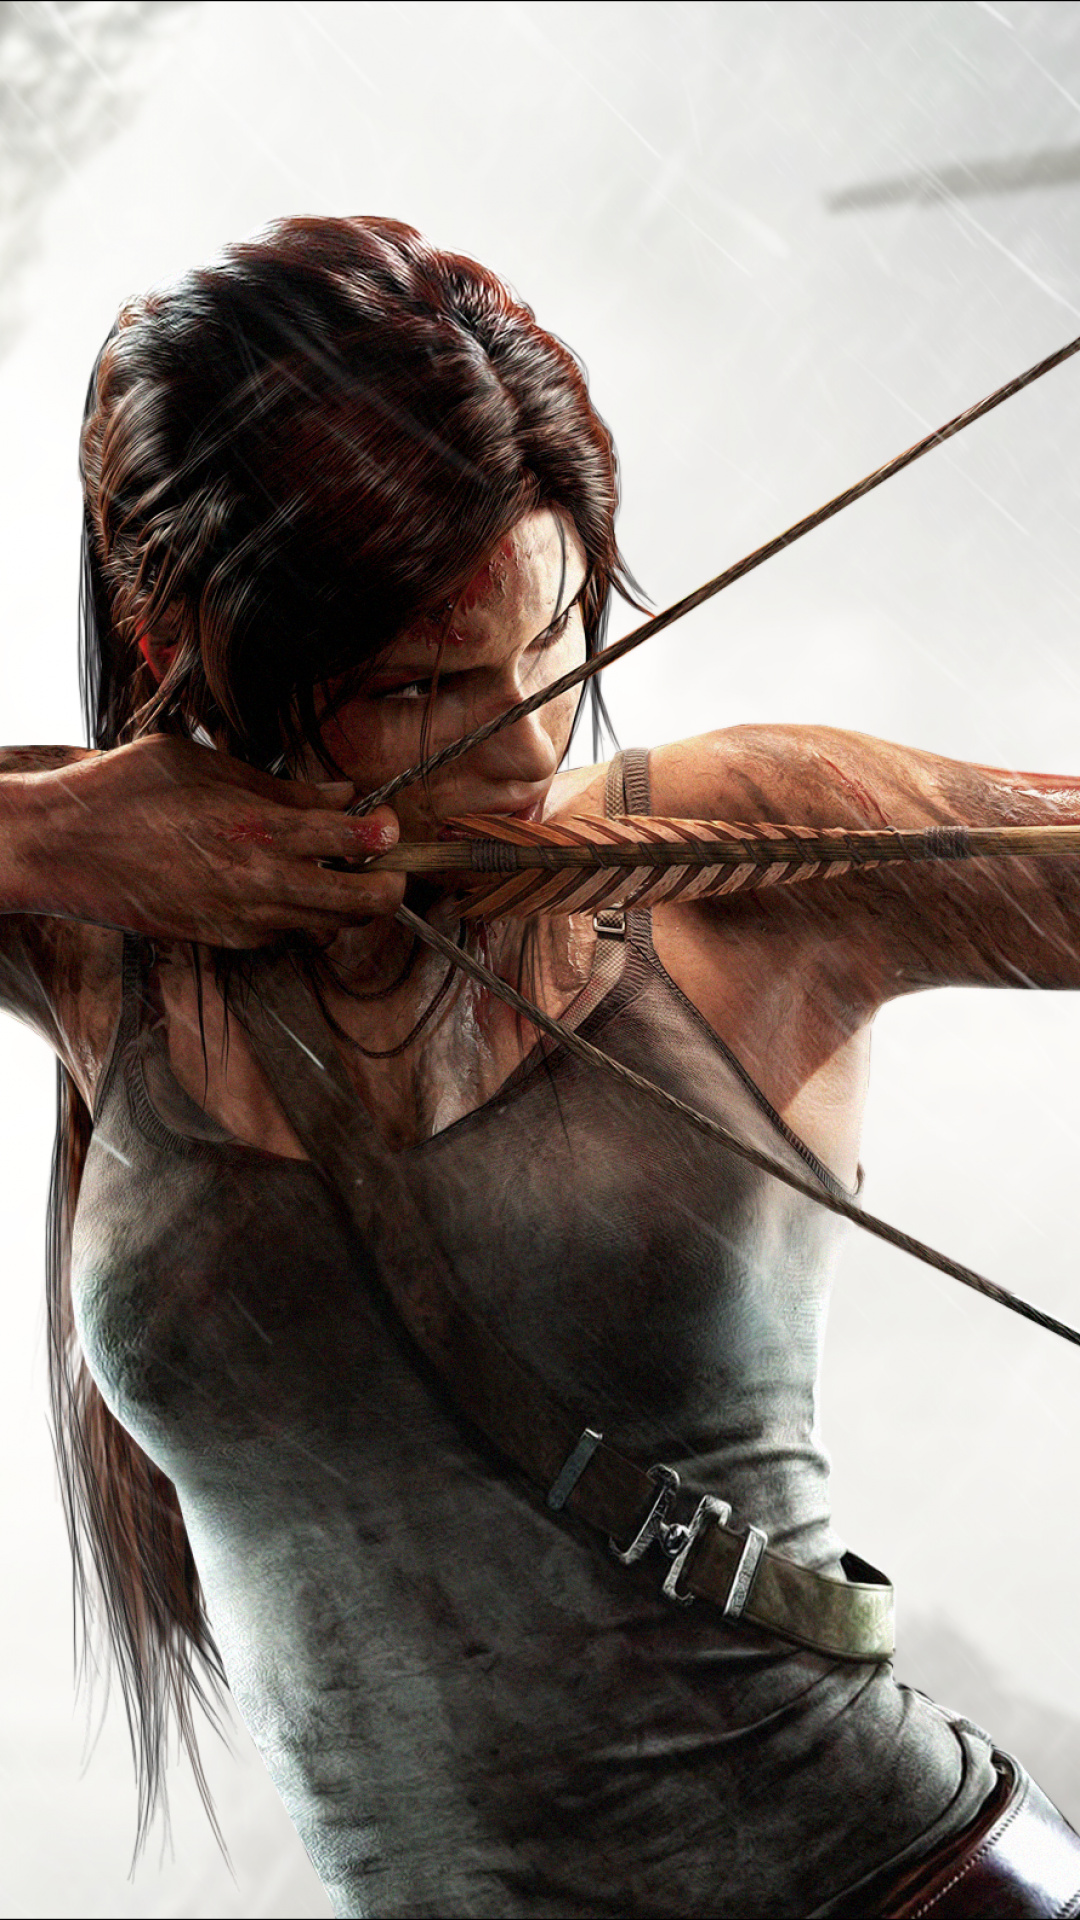 Tomb Raider phone wallpapers, Top phone backgrounds, Gaming on the go, 1080x1920 Full HD Phone